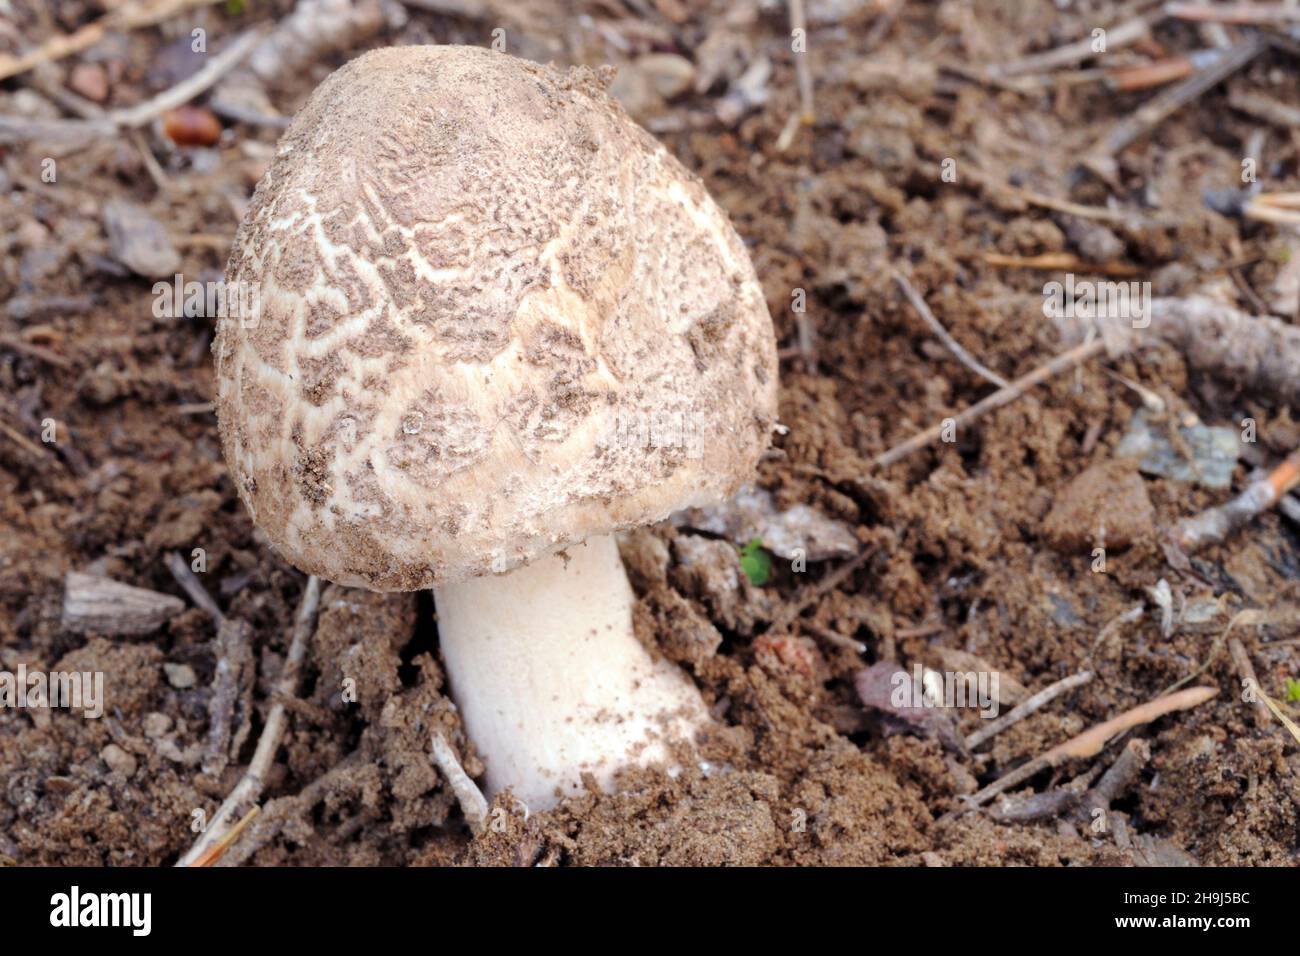 Mushrooms are a group of fungi with sporocarps, or fruiting bodies in the shape of an umbrella. Stock Photo